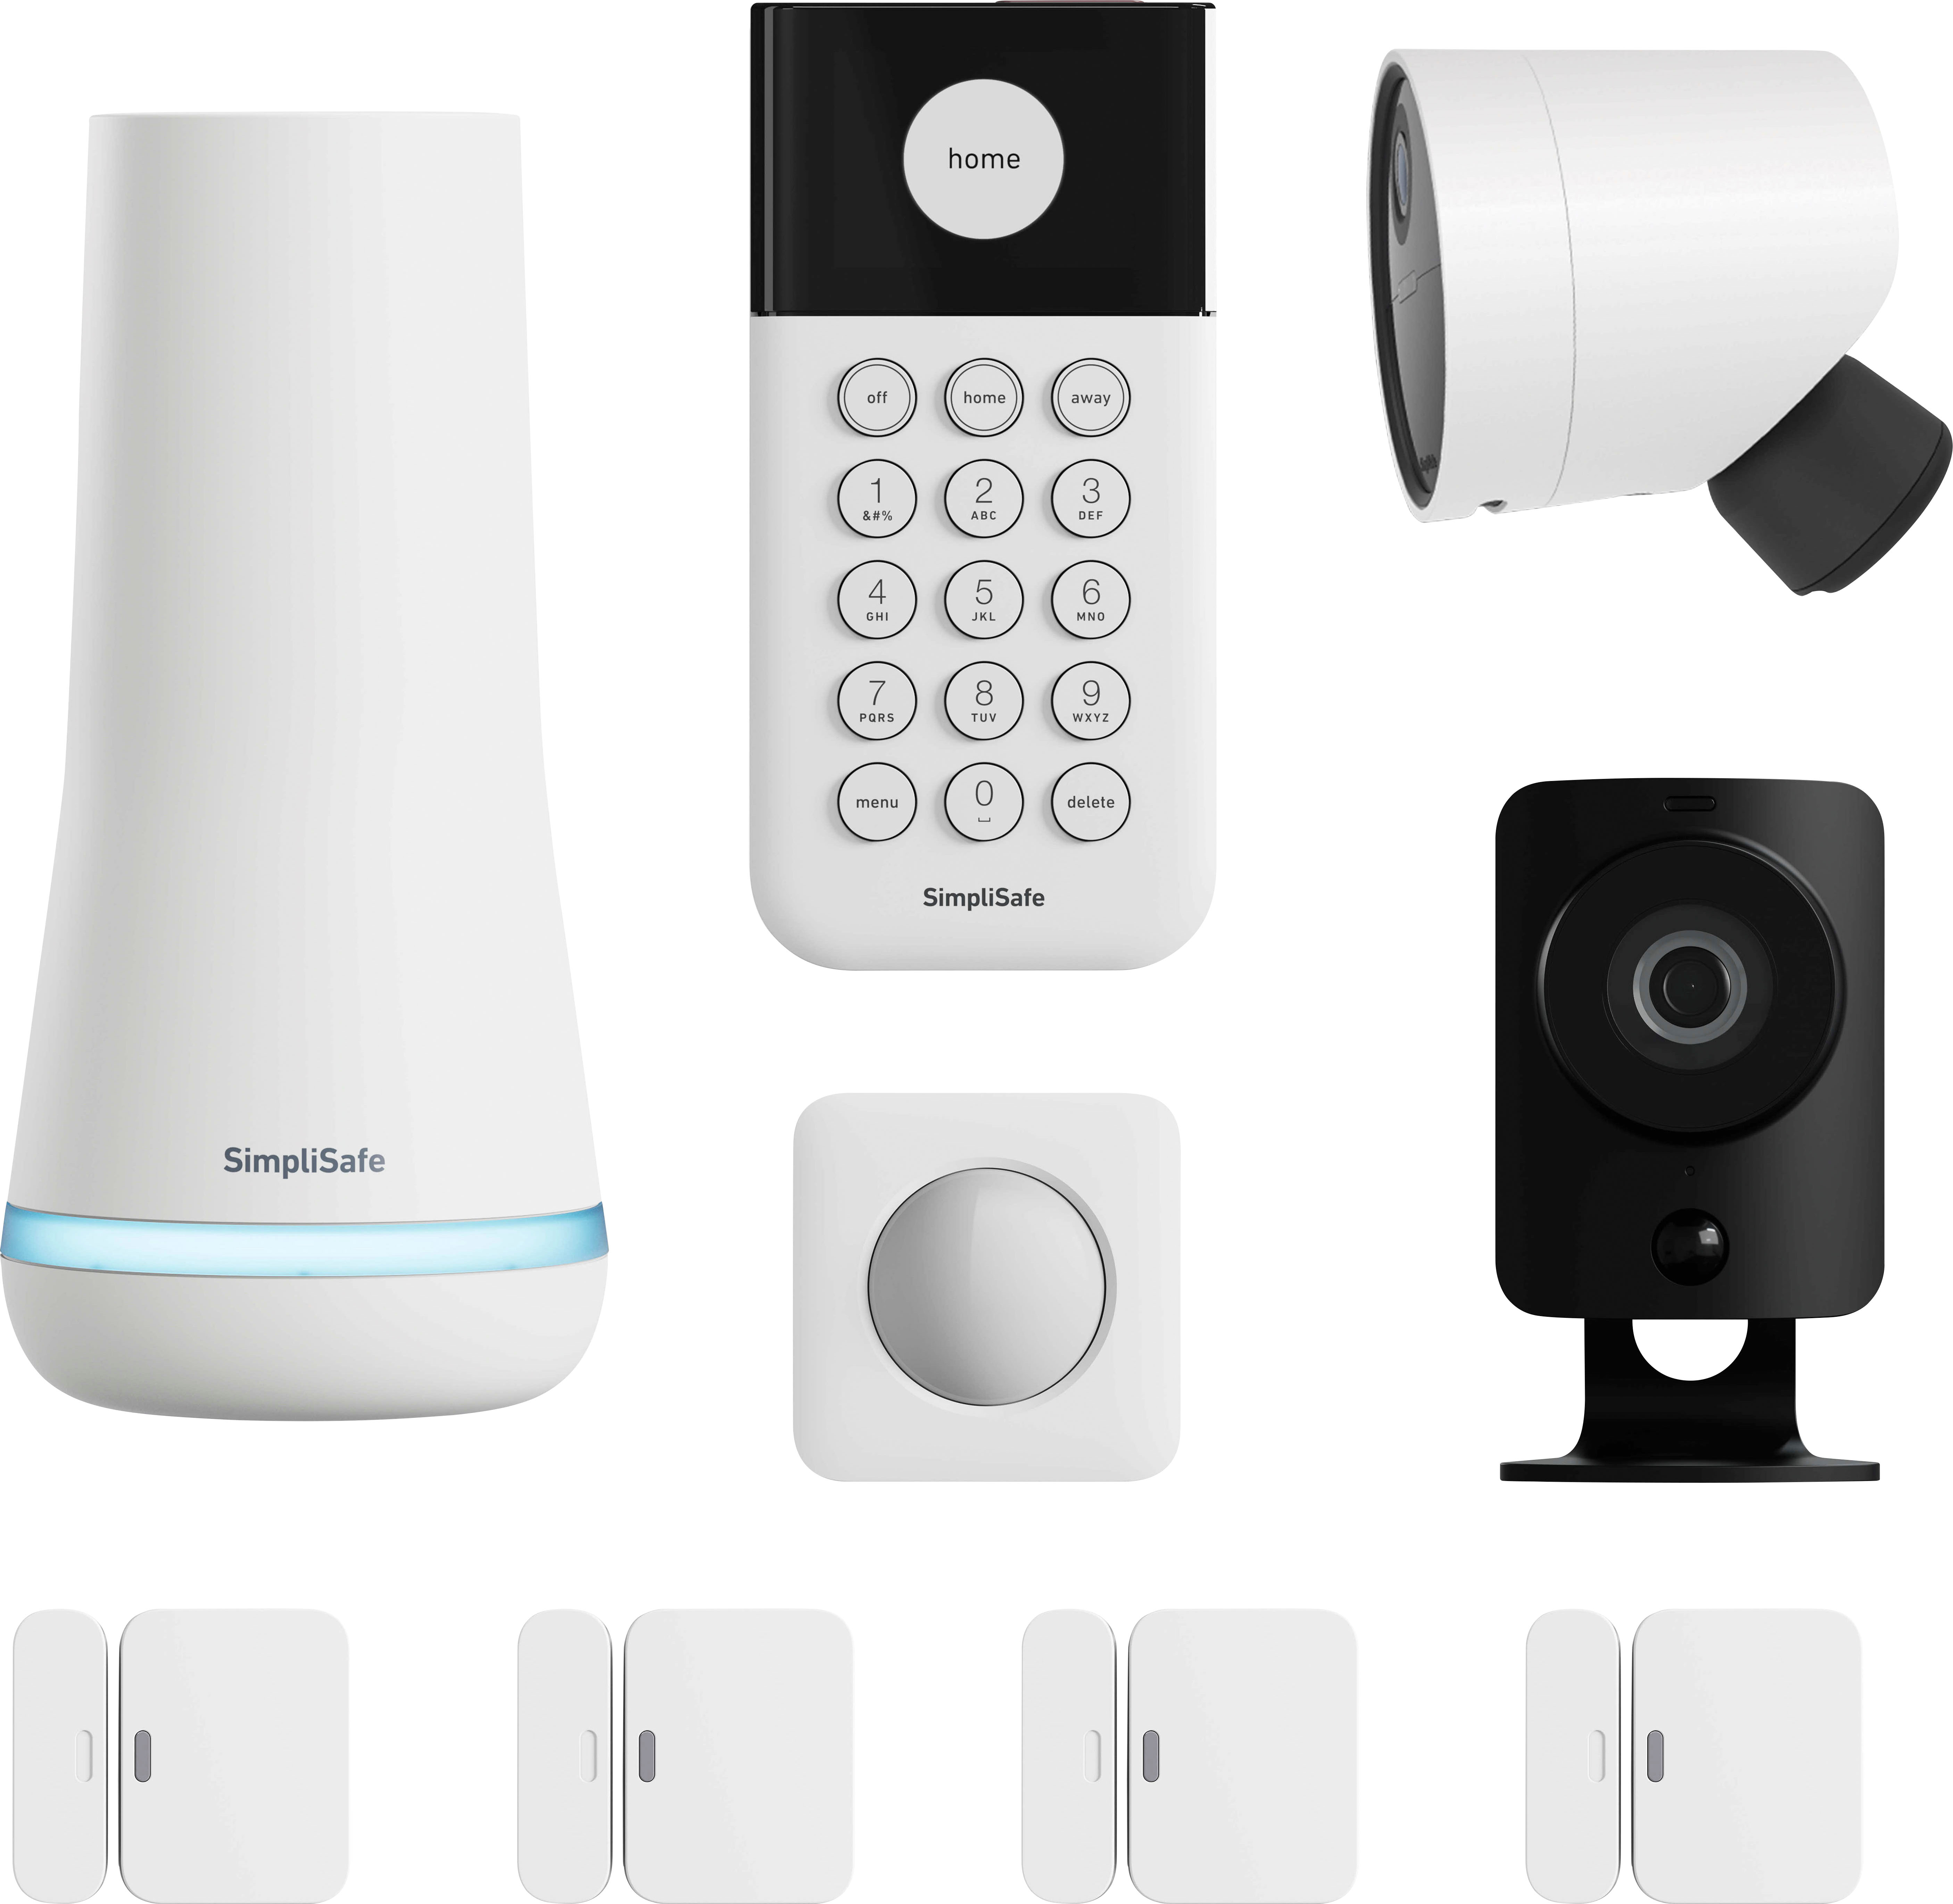 home security images